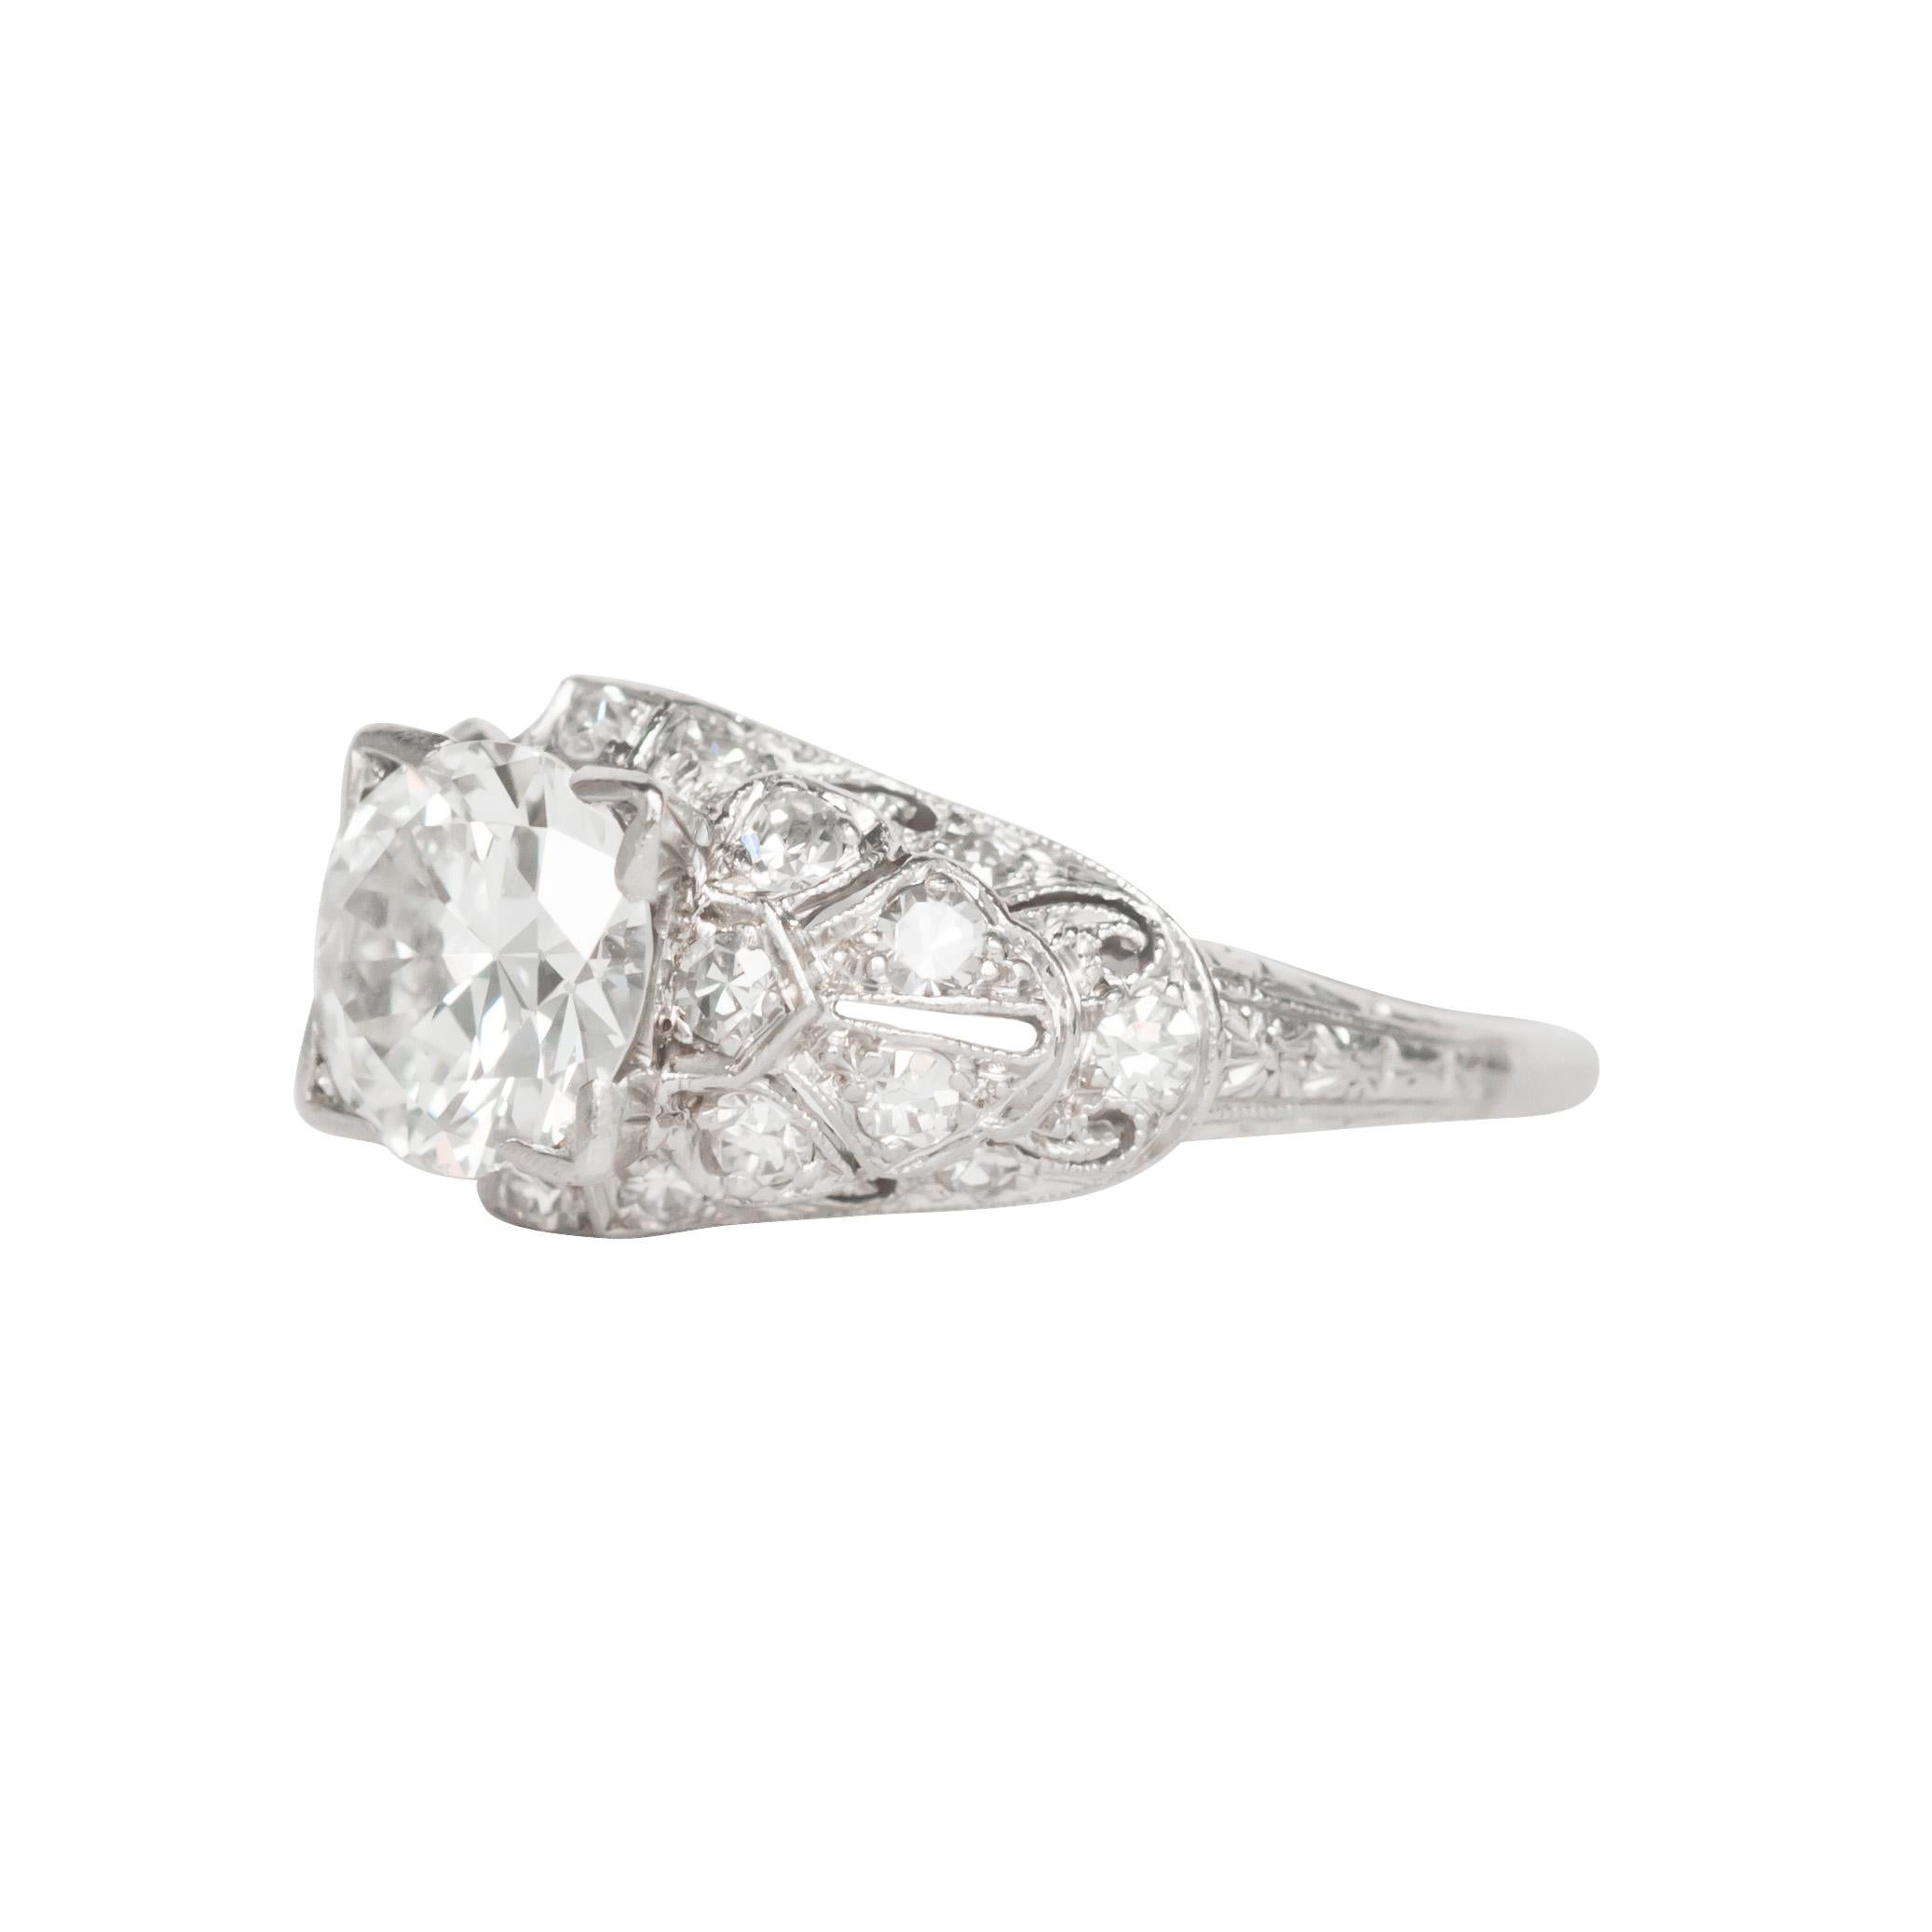 Item Details: 
Ring Size: 7.75
Metal Type: Platinum [Hallmarked, and Tested]
Weight: 4.2 grams

Center Diamond Details:
GIA REPORT # 2201874445
Weight: 1.16 carat
Cut: Old European Brilliant
Color: I
Clarity: SI1

Side Diamond Details:
Weight: .25